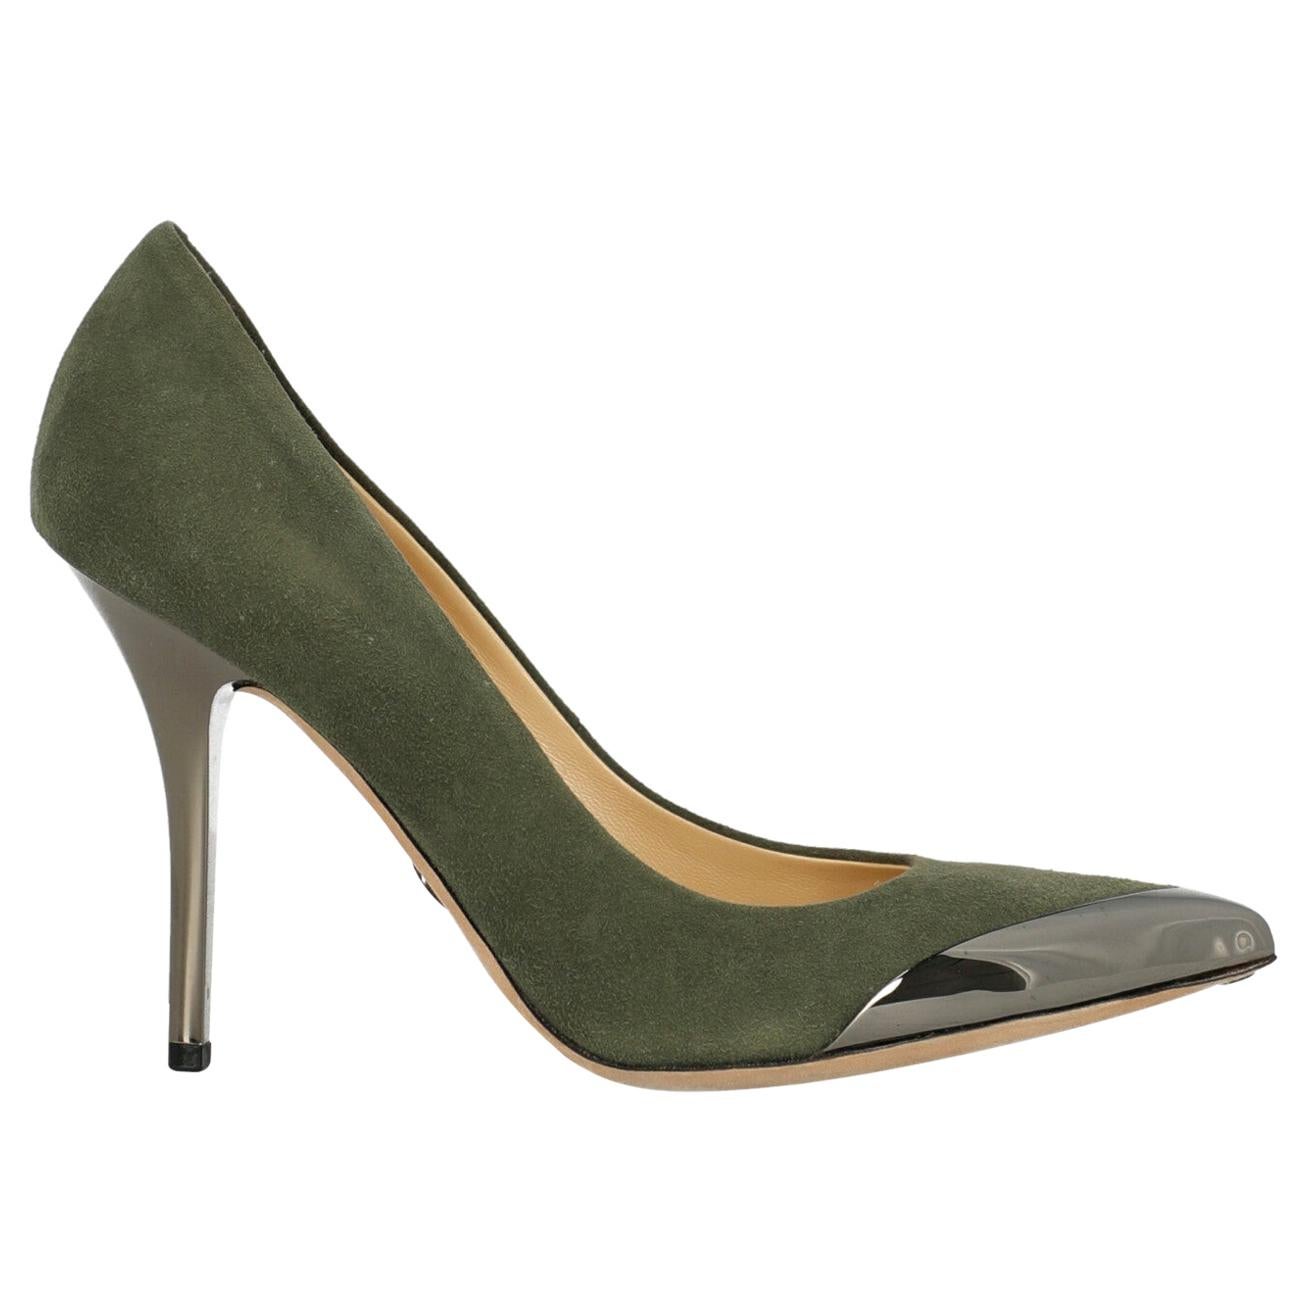 Emilio Pucci Woman Pumps Green Leather IT 36 For Sale